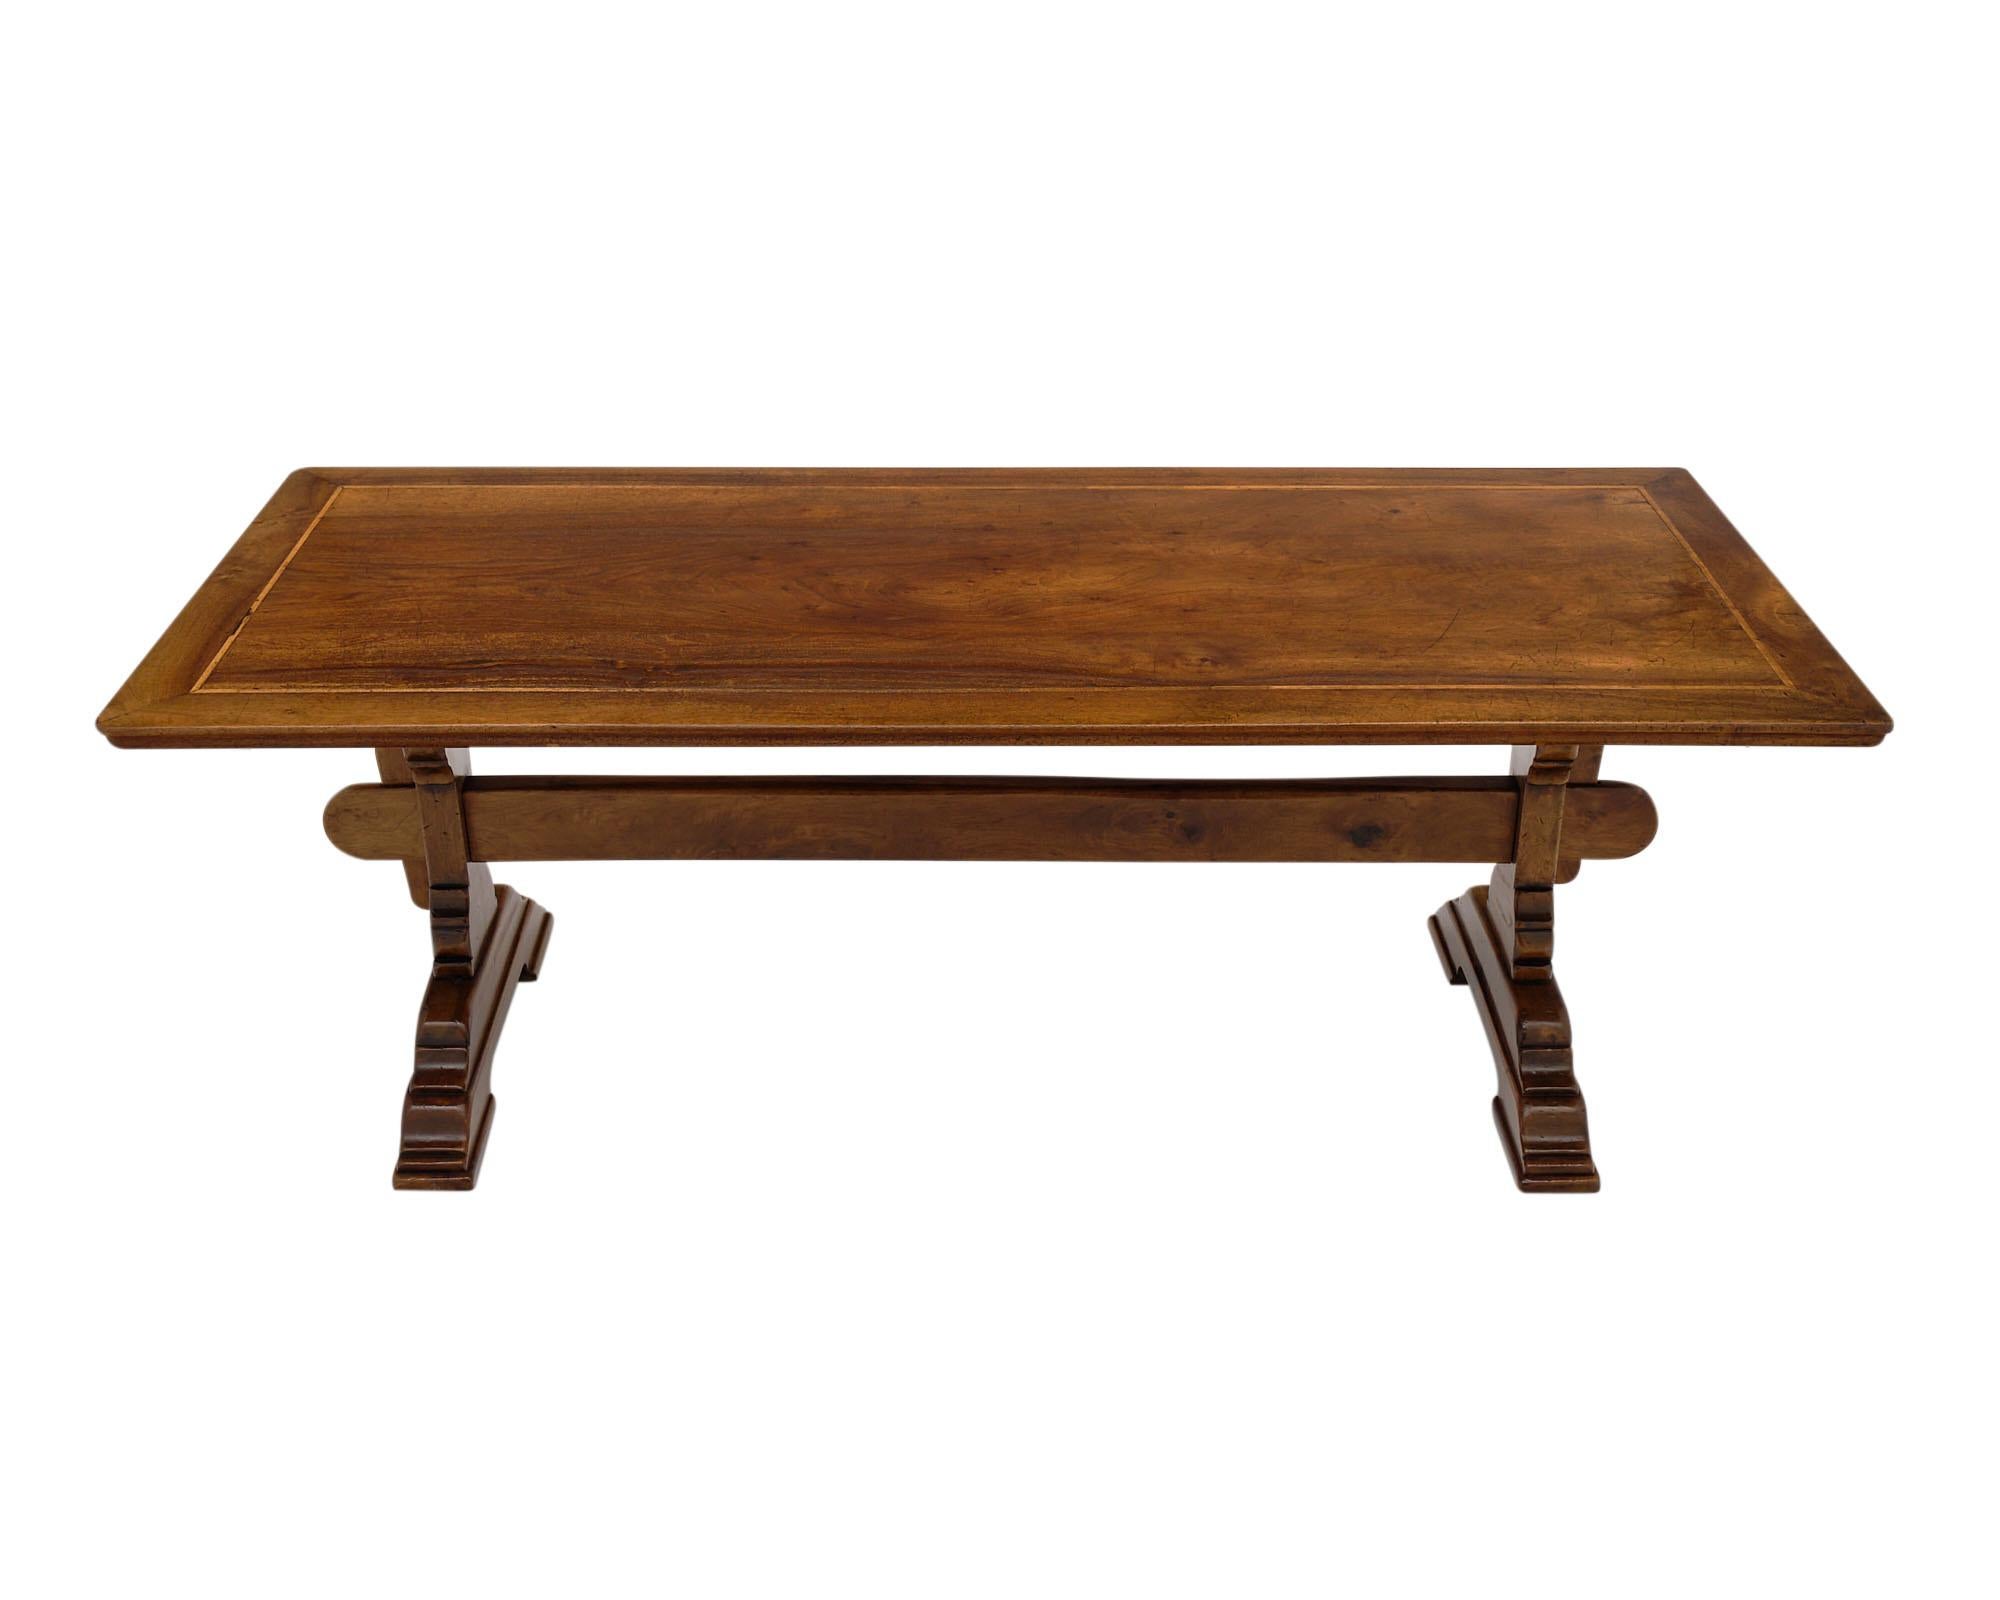 Late Victorian Antique French Walnut Monastery Table